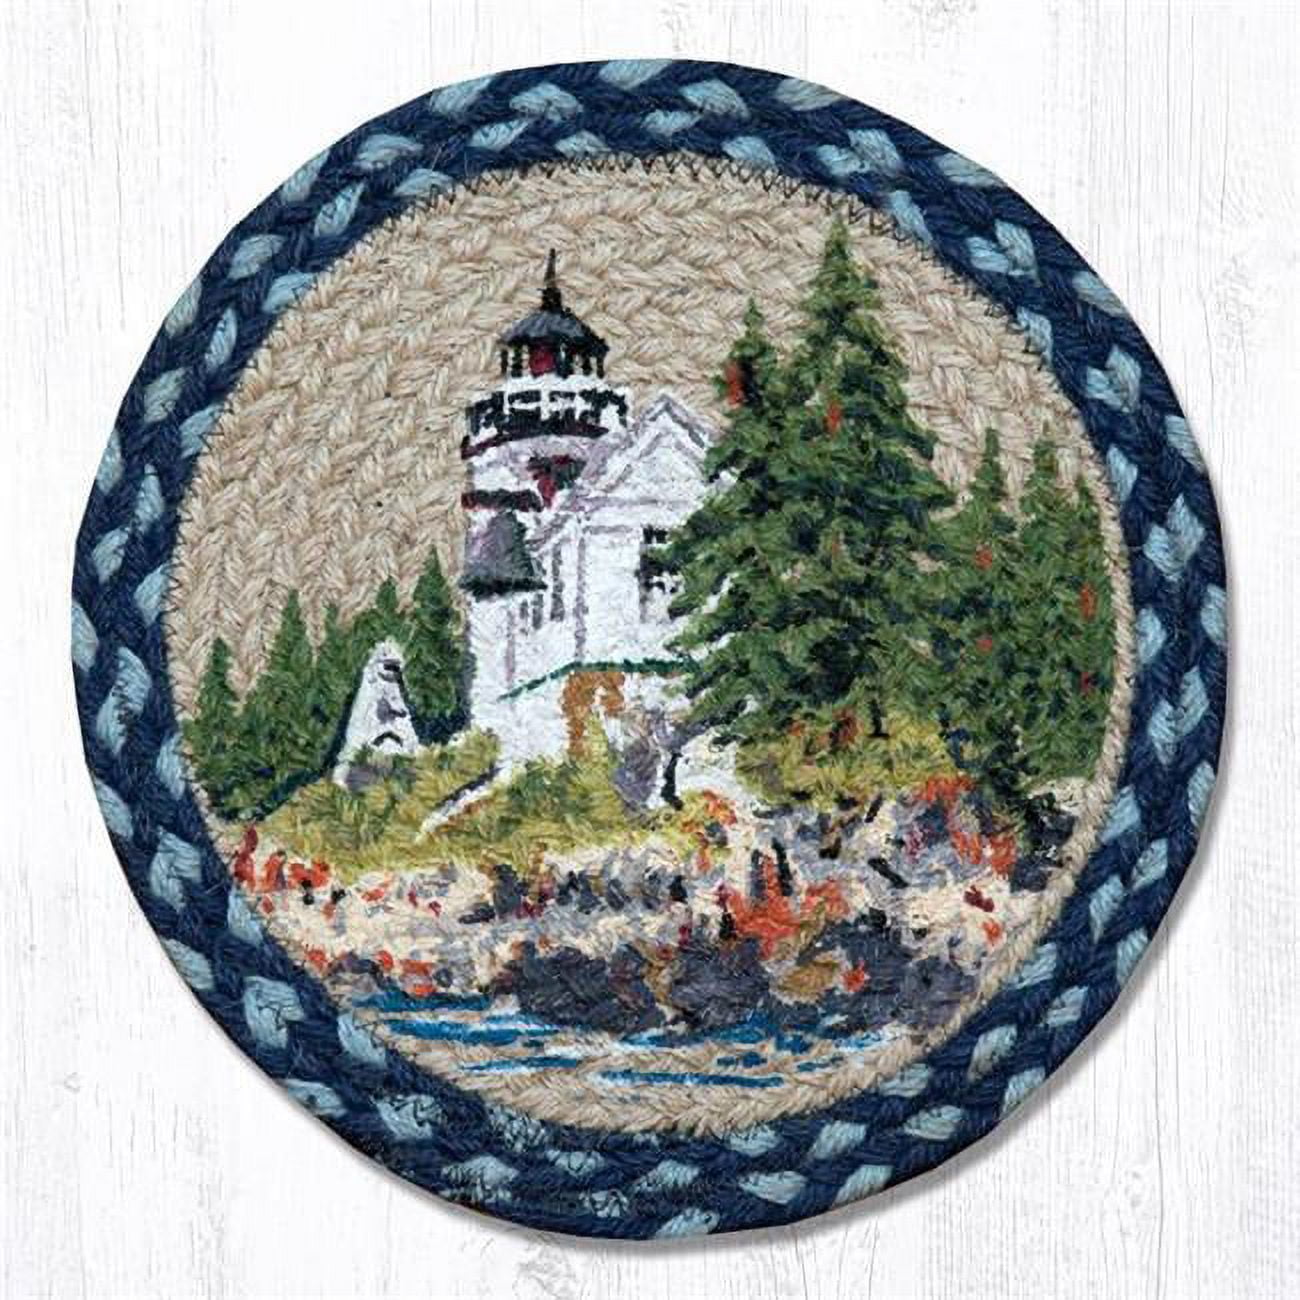 10 X 10 In. Bass Harbor Printed Round Swatch